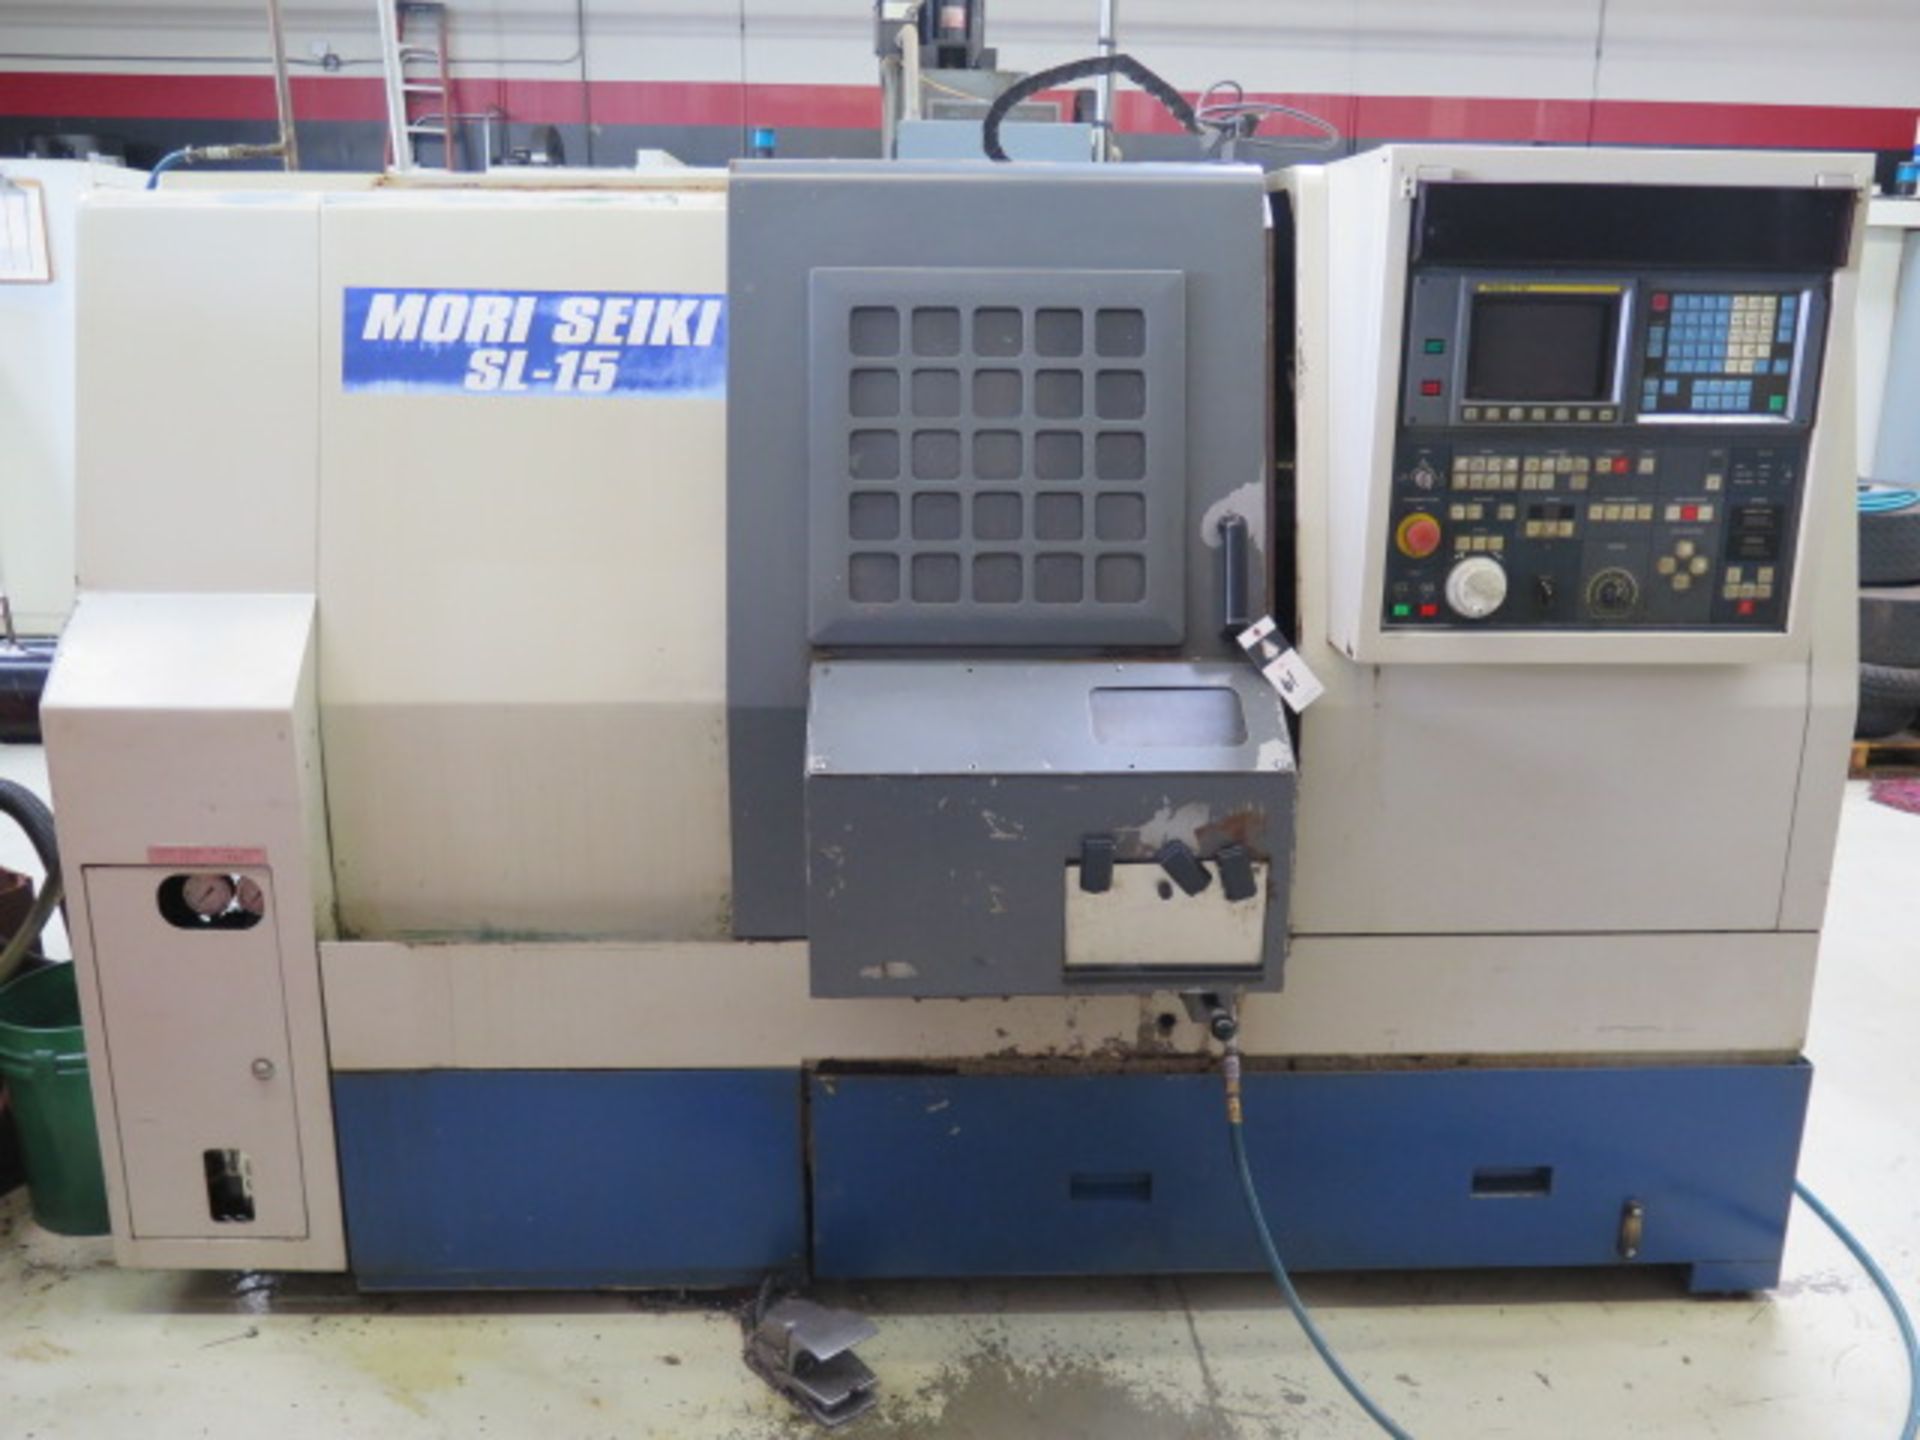 Mori Seiki SL-15 CNC Turning Center s/n 1047 w/ Fanuc MORIC-T4F Controls, Tool Presetter, SOLD AS IS